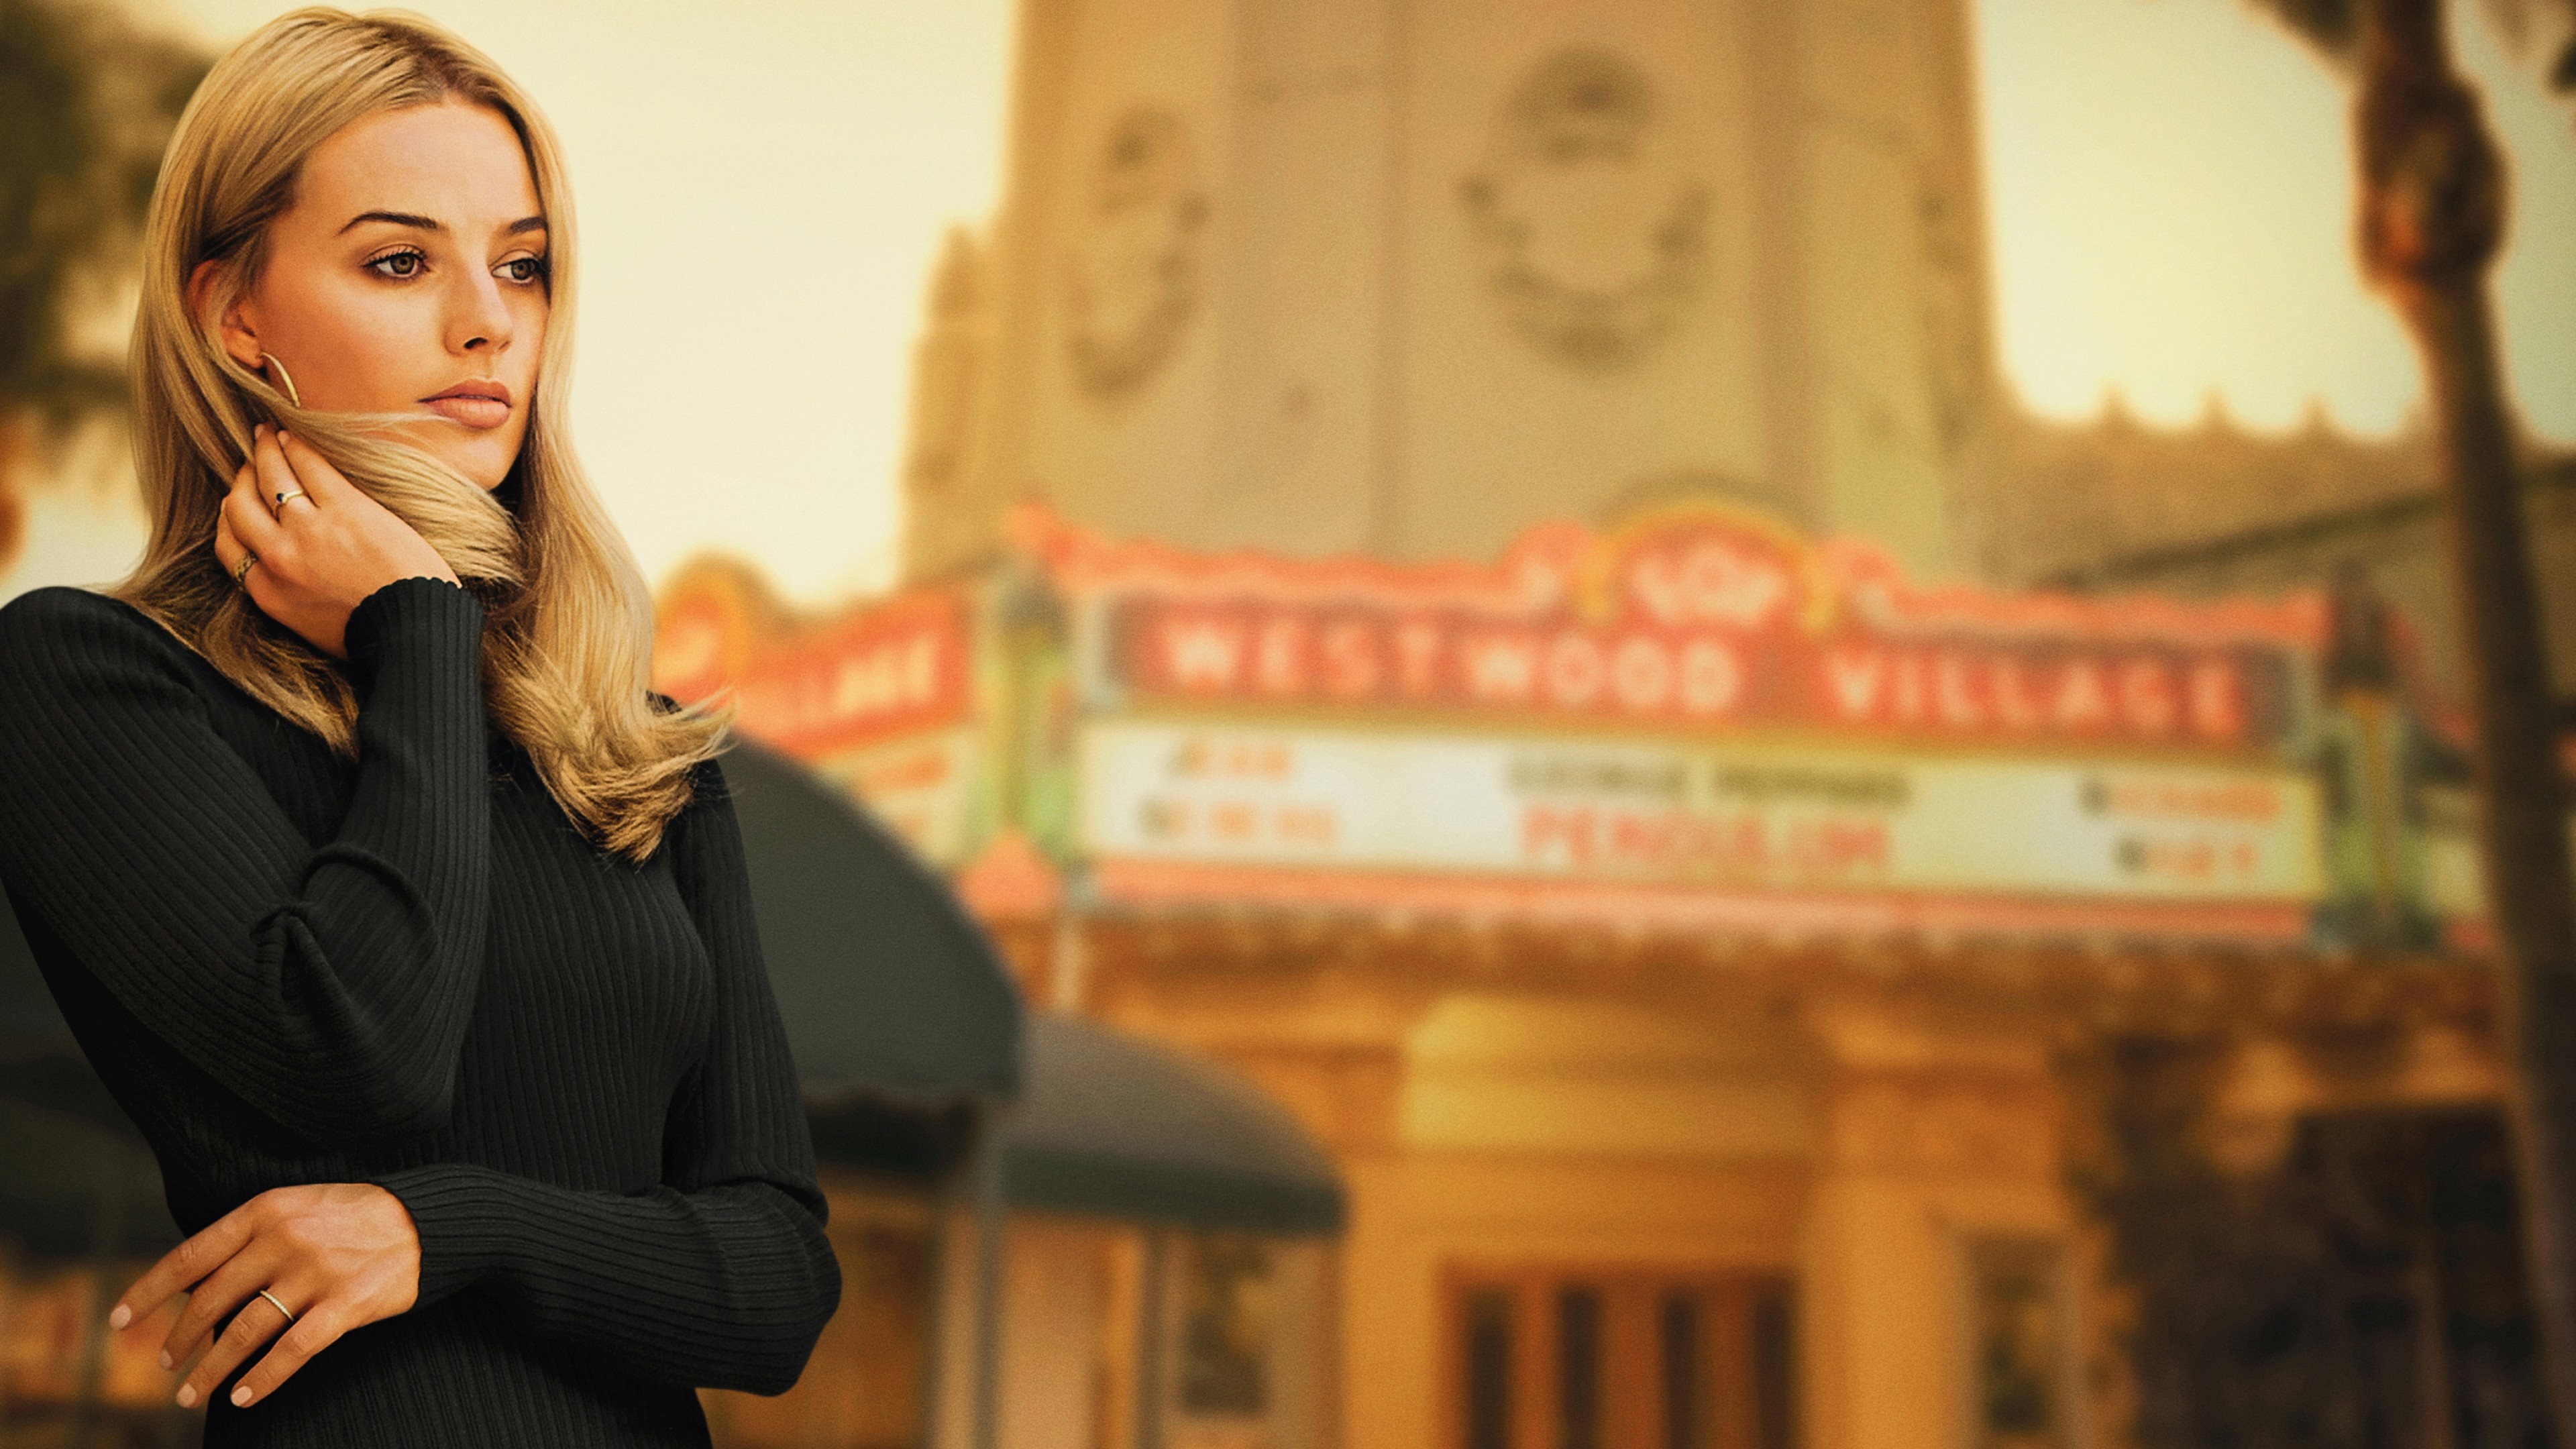 Margot Robbie: Once Upon a Time in Hollywood, Sharon Tate. 3840x2160 4K Background.